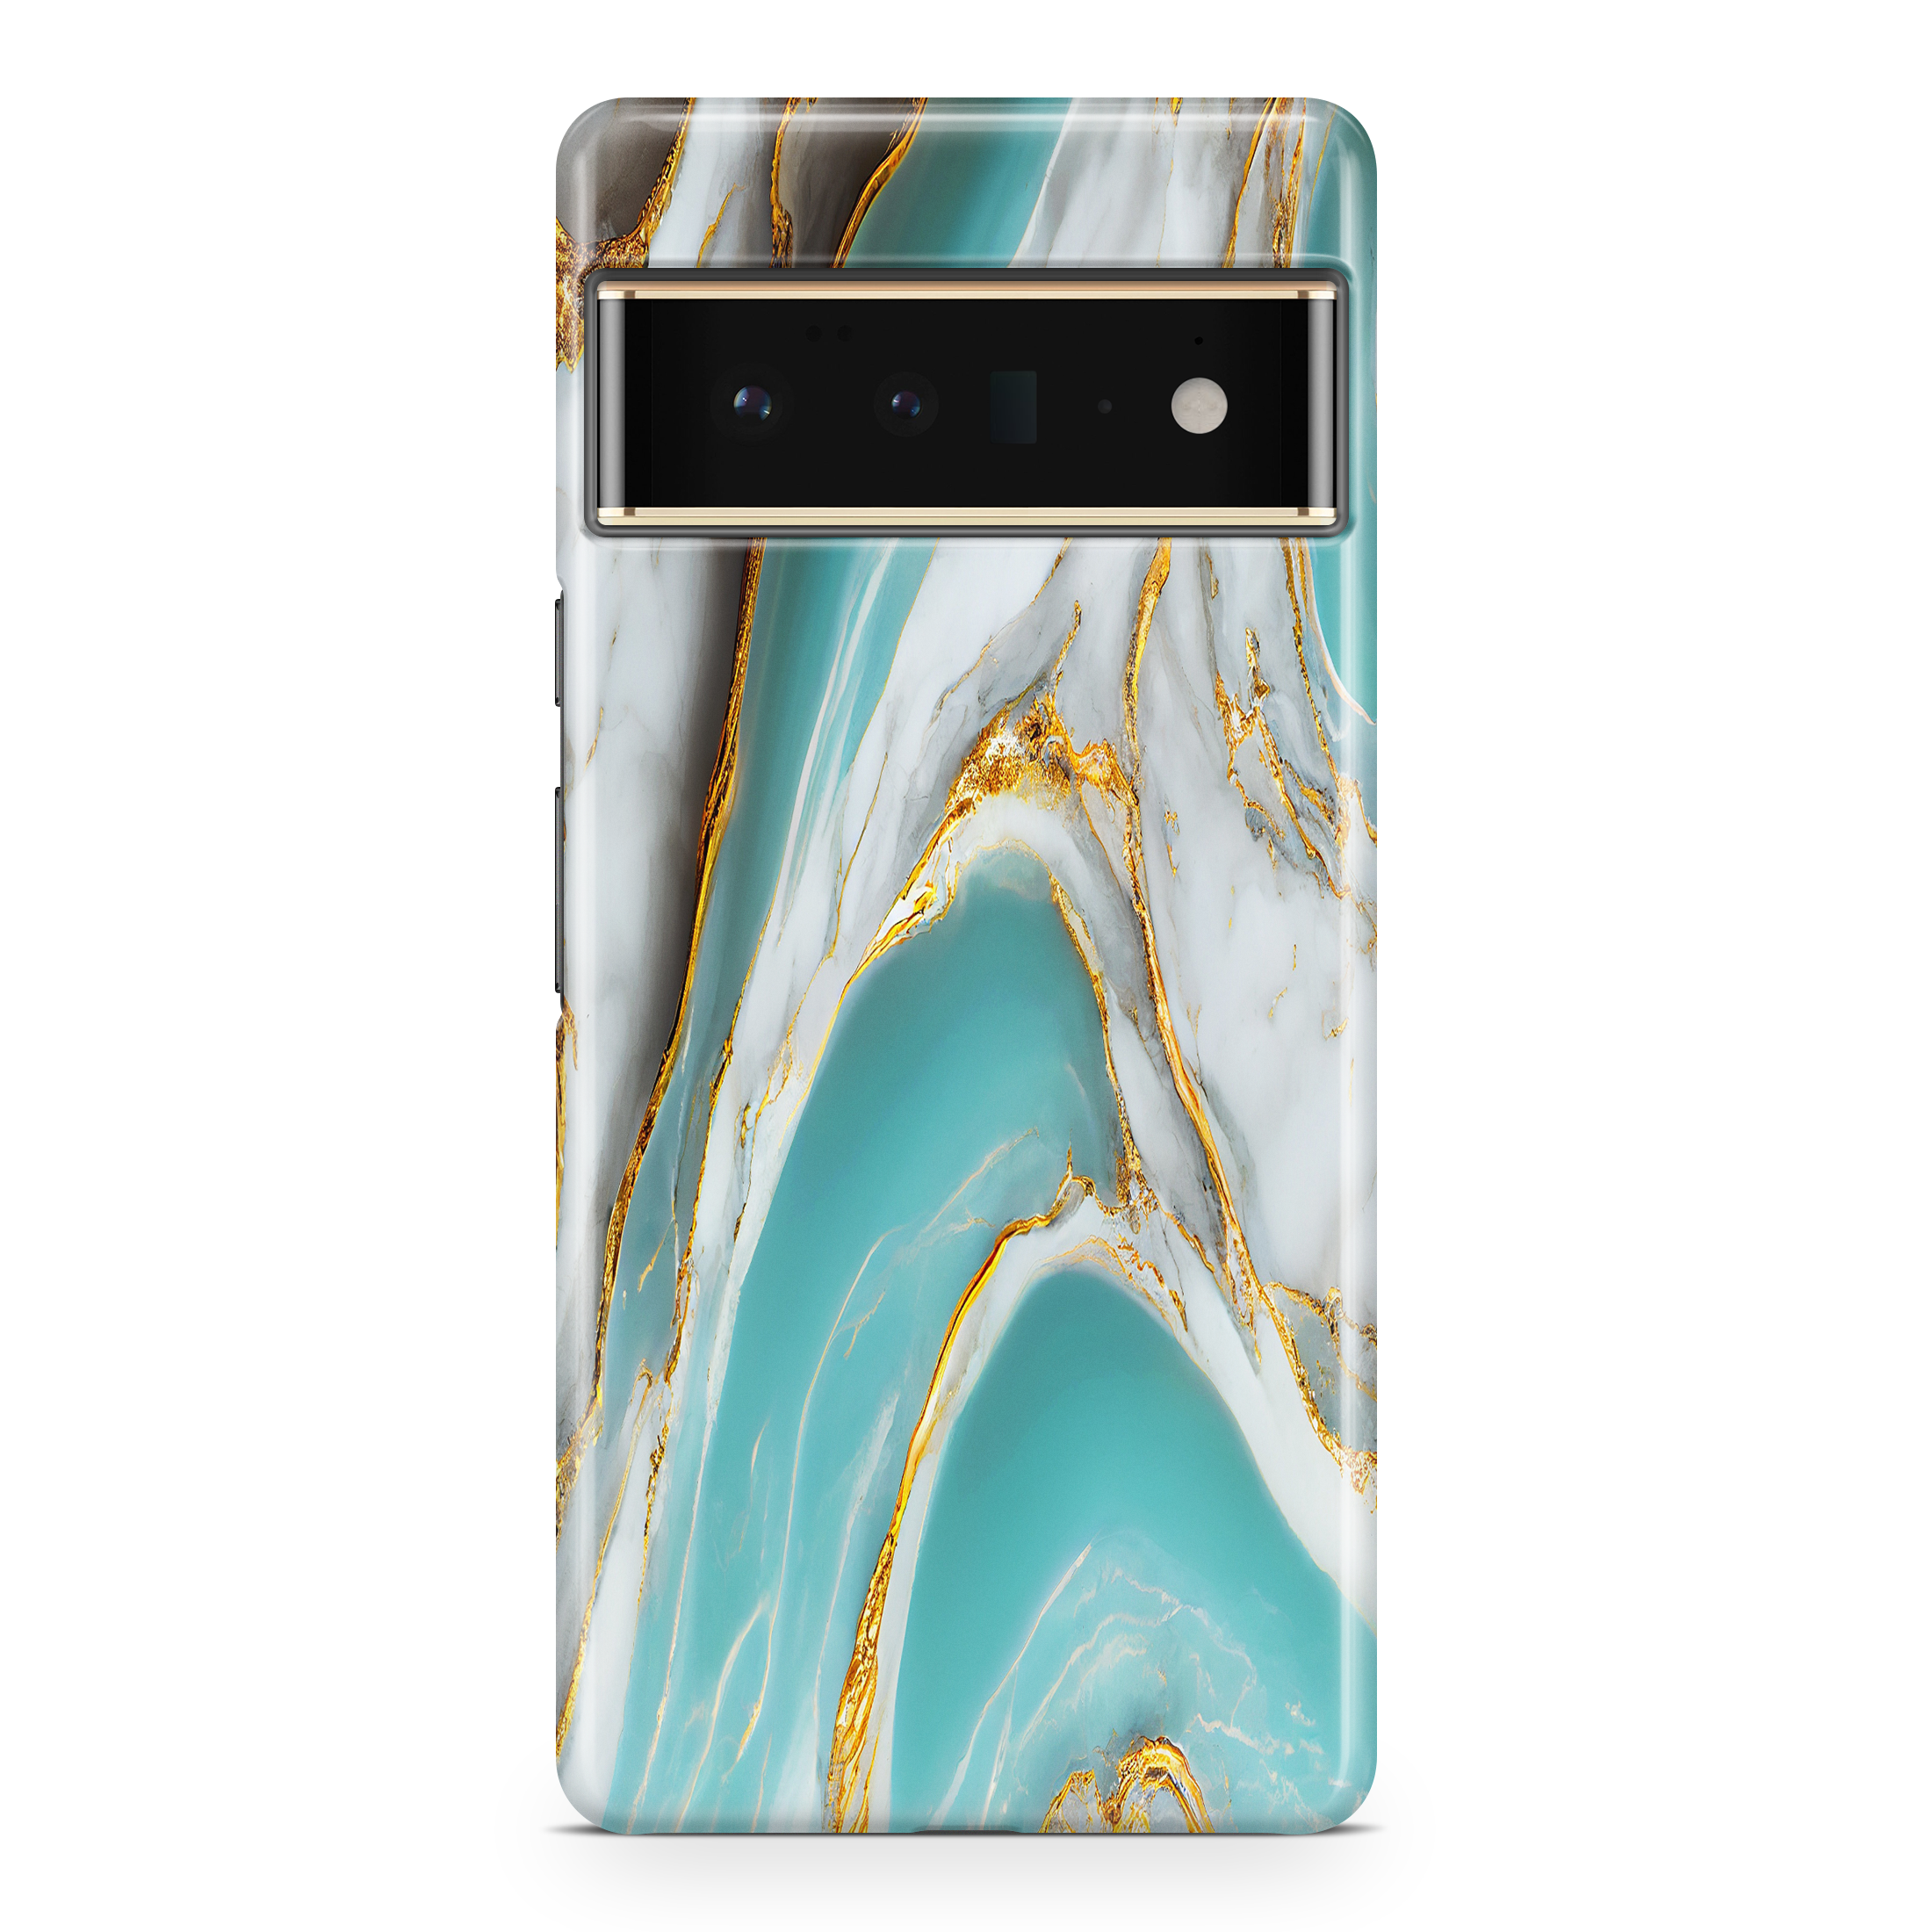 Baby Blue Marble - Google phone case designs by CaseSwagger